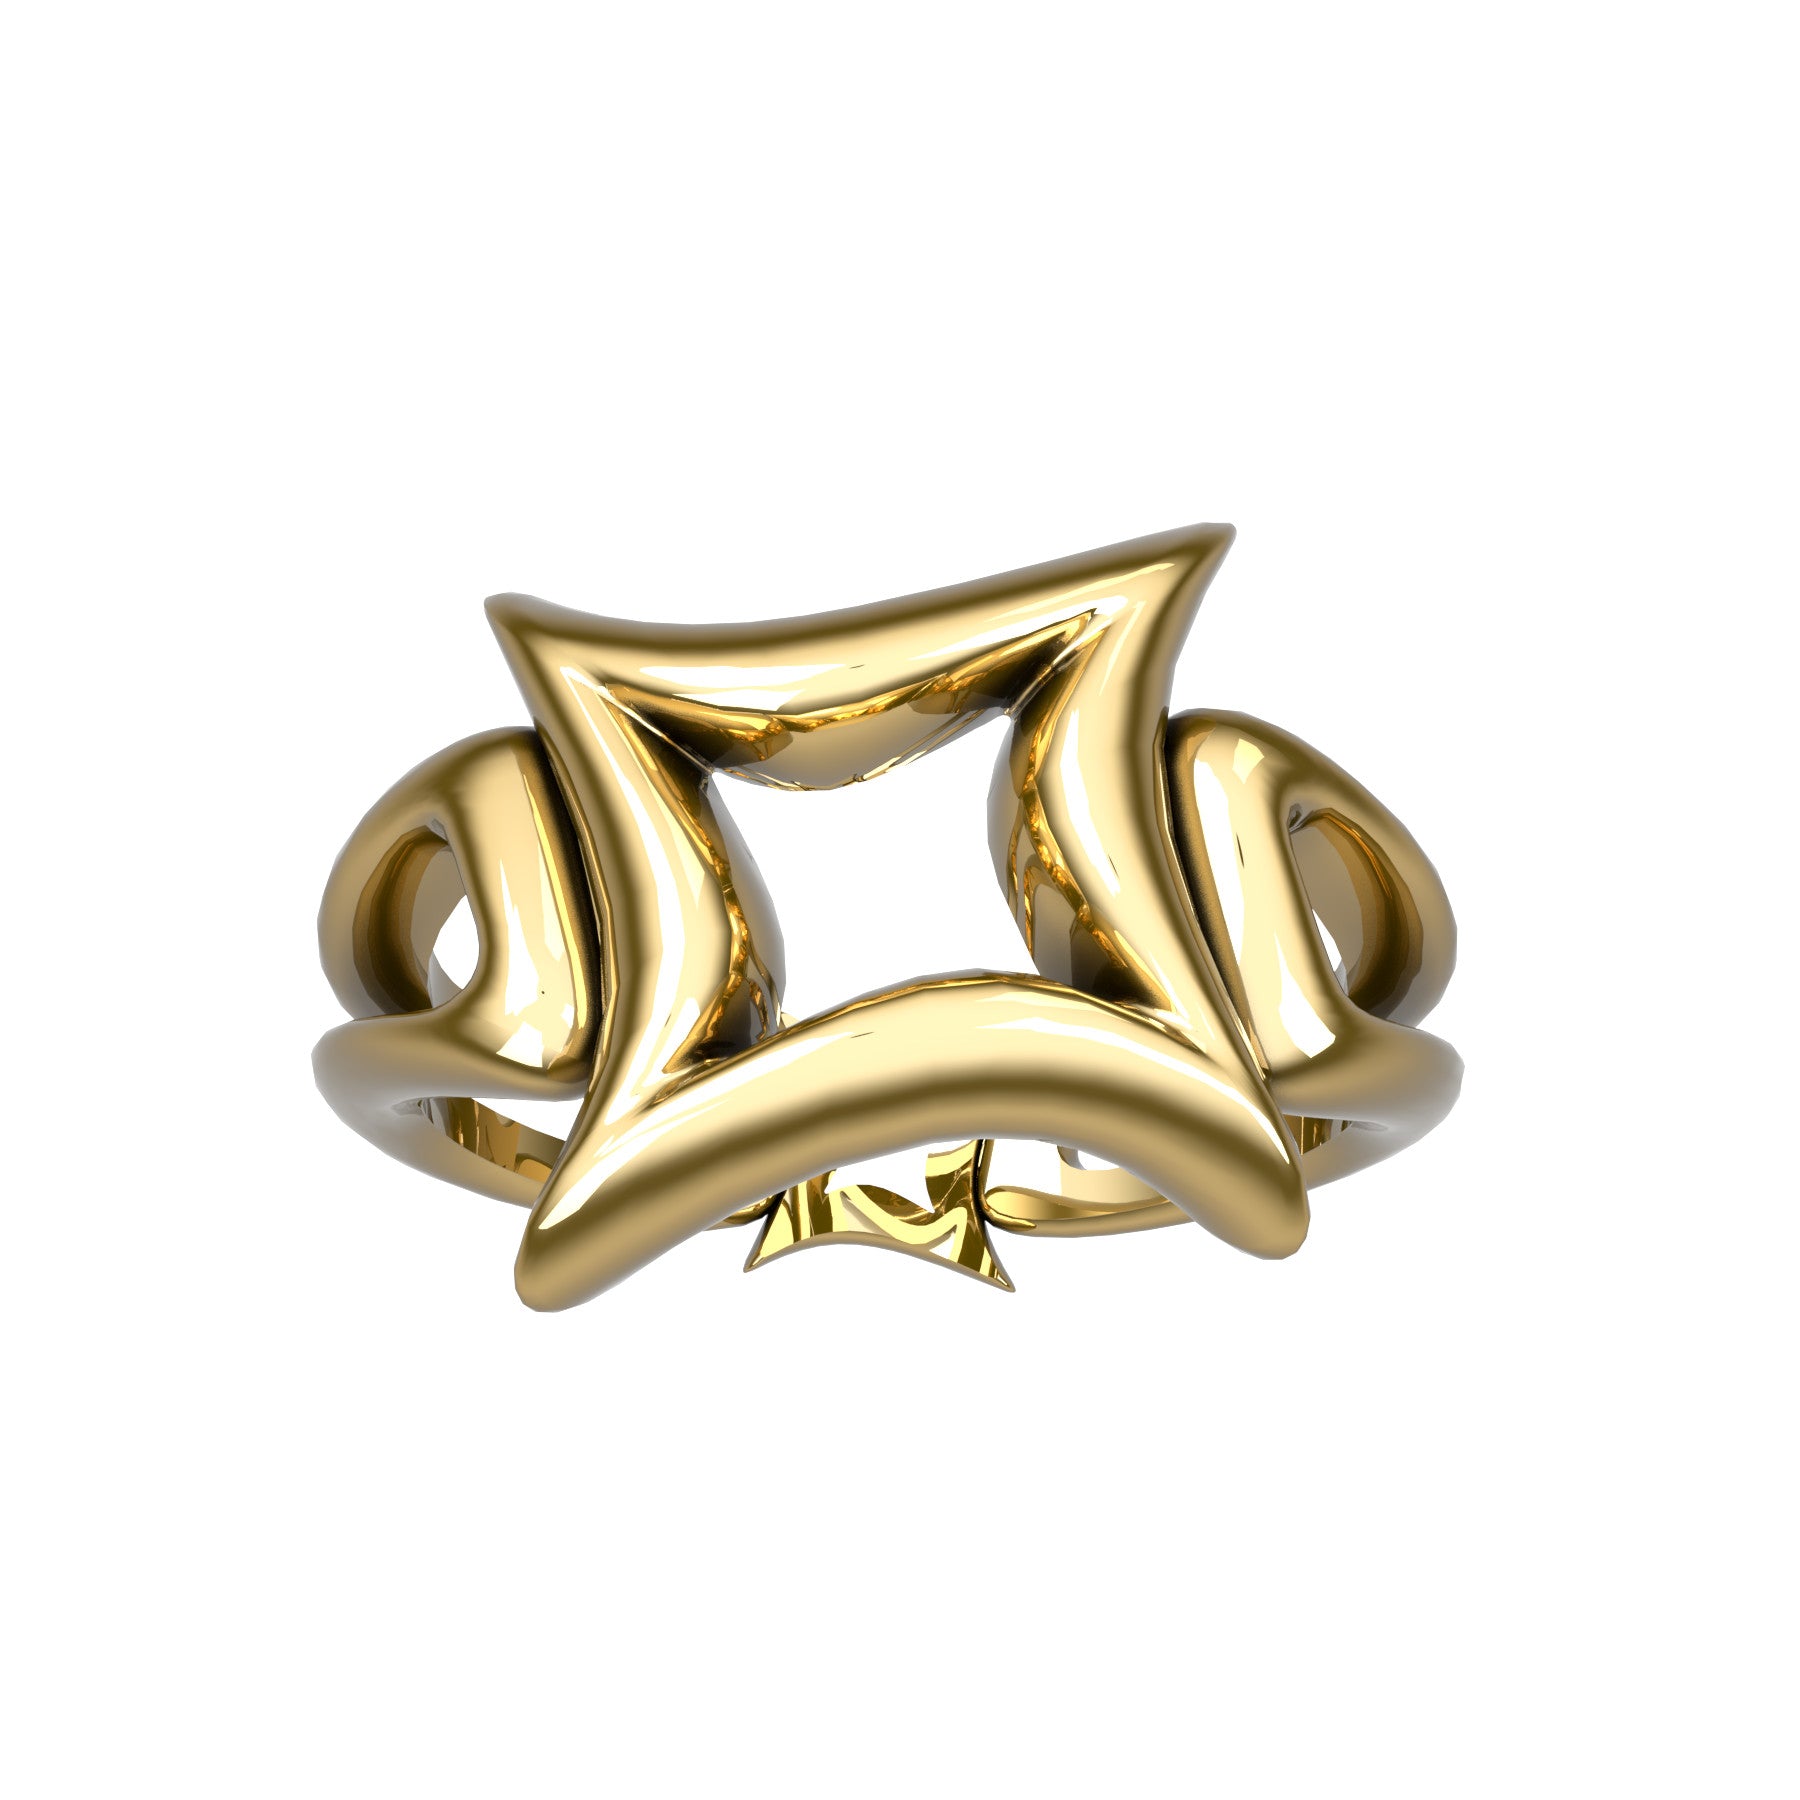 etoile bizarre ring, 18 K yellow gold, weight about 5,4 g. (0.19 oz), width 13,5 mm max